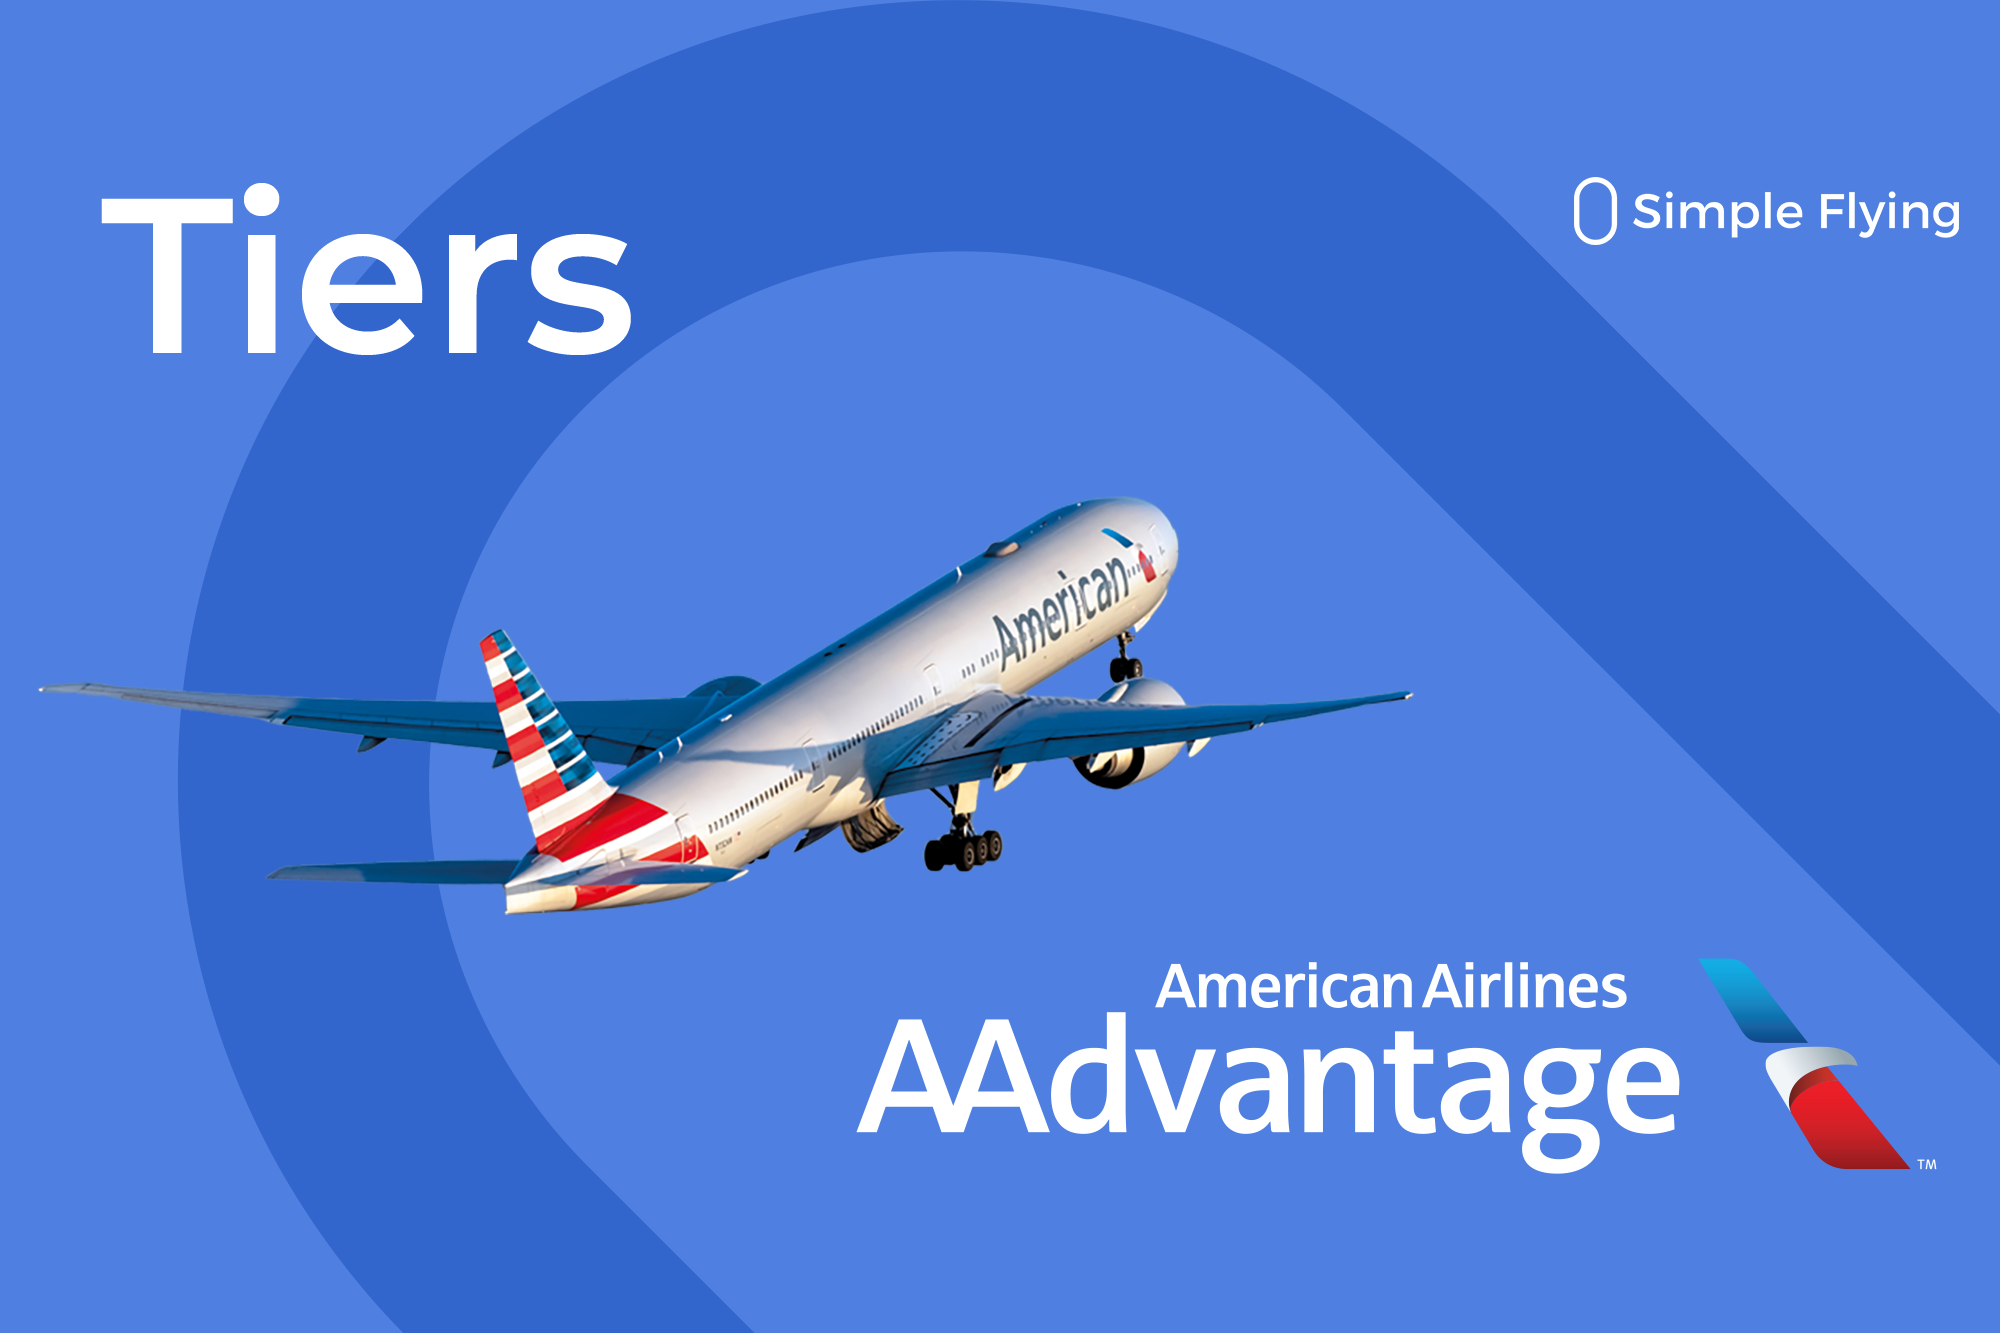 The Different Tiers Of American Airlines' AAdvantage Program